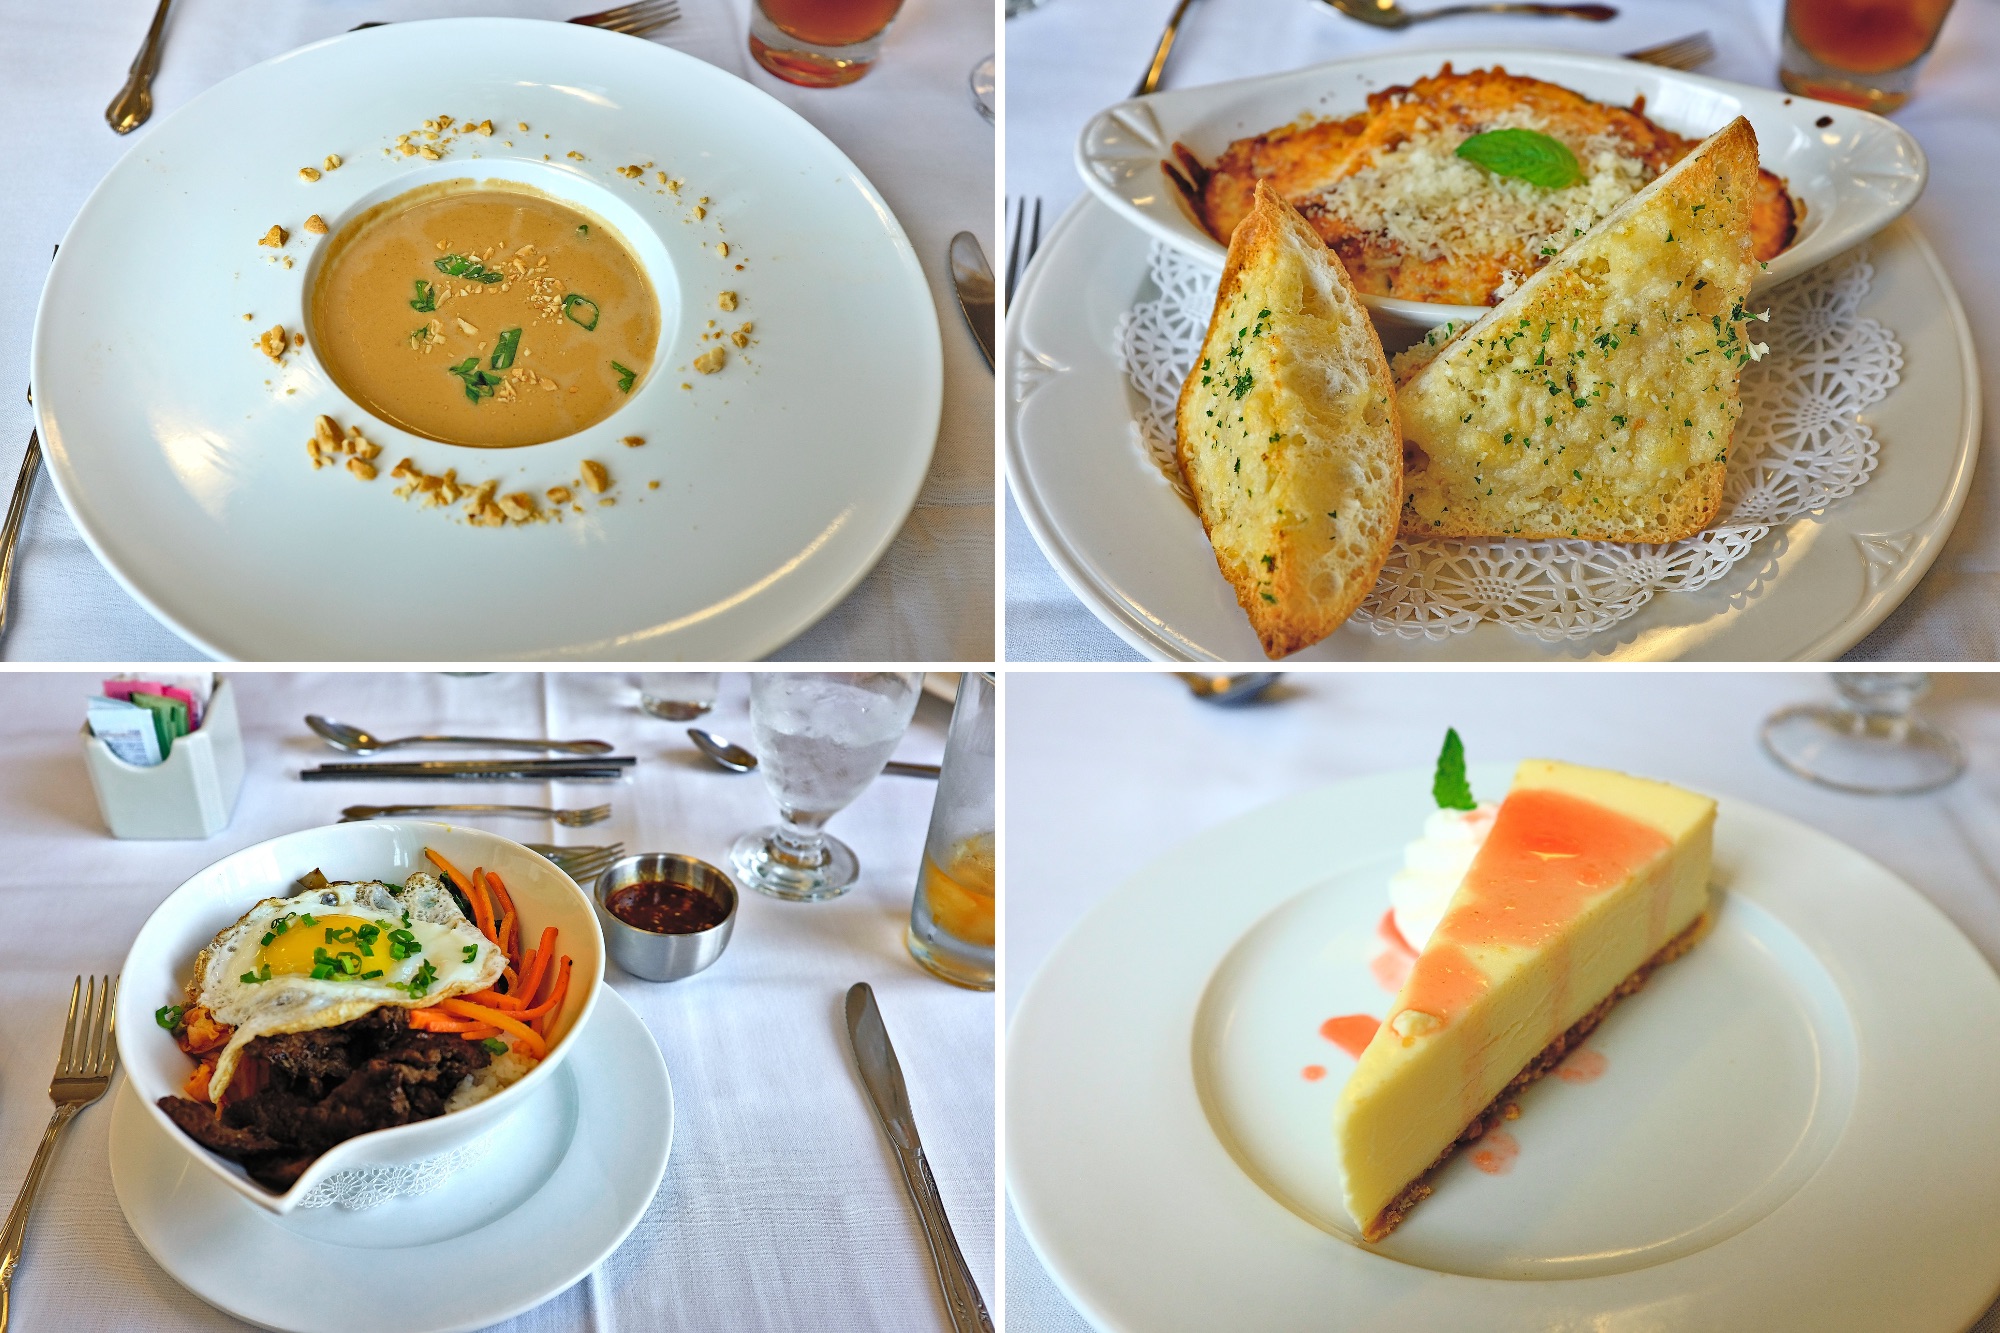 Collage of all items served at CPCC Greenway Restaurant